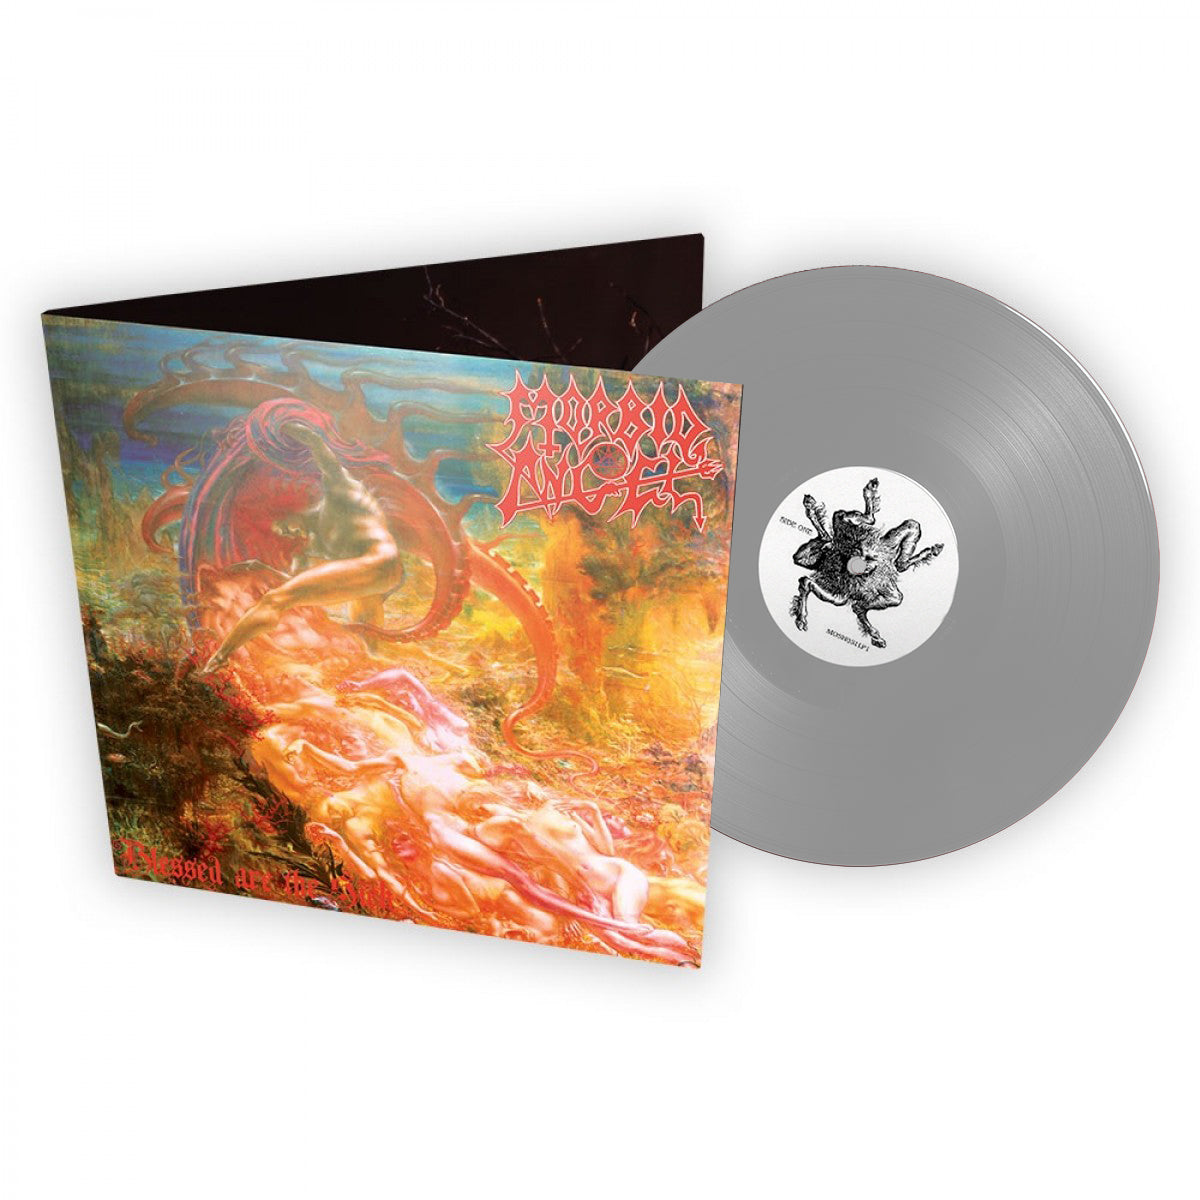 Morbid Angel "Blessed Are The Sick" FDR Silver Vinyl